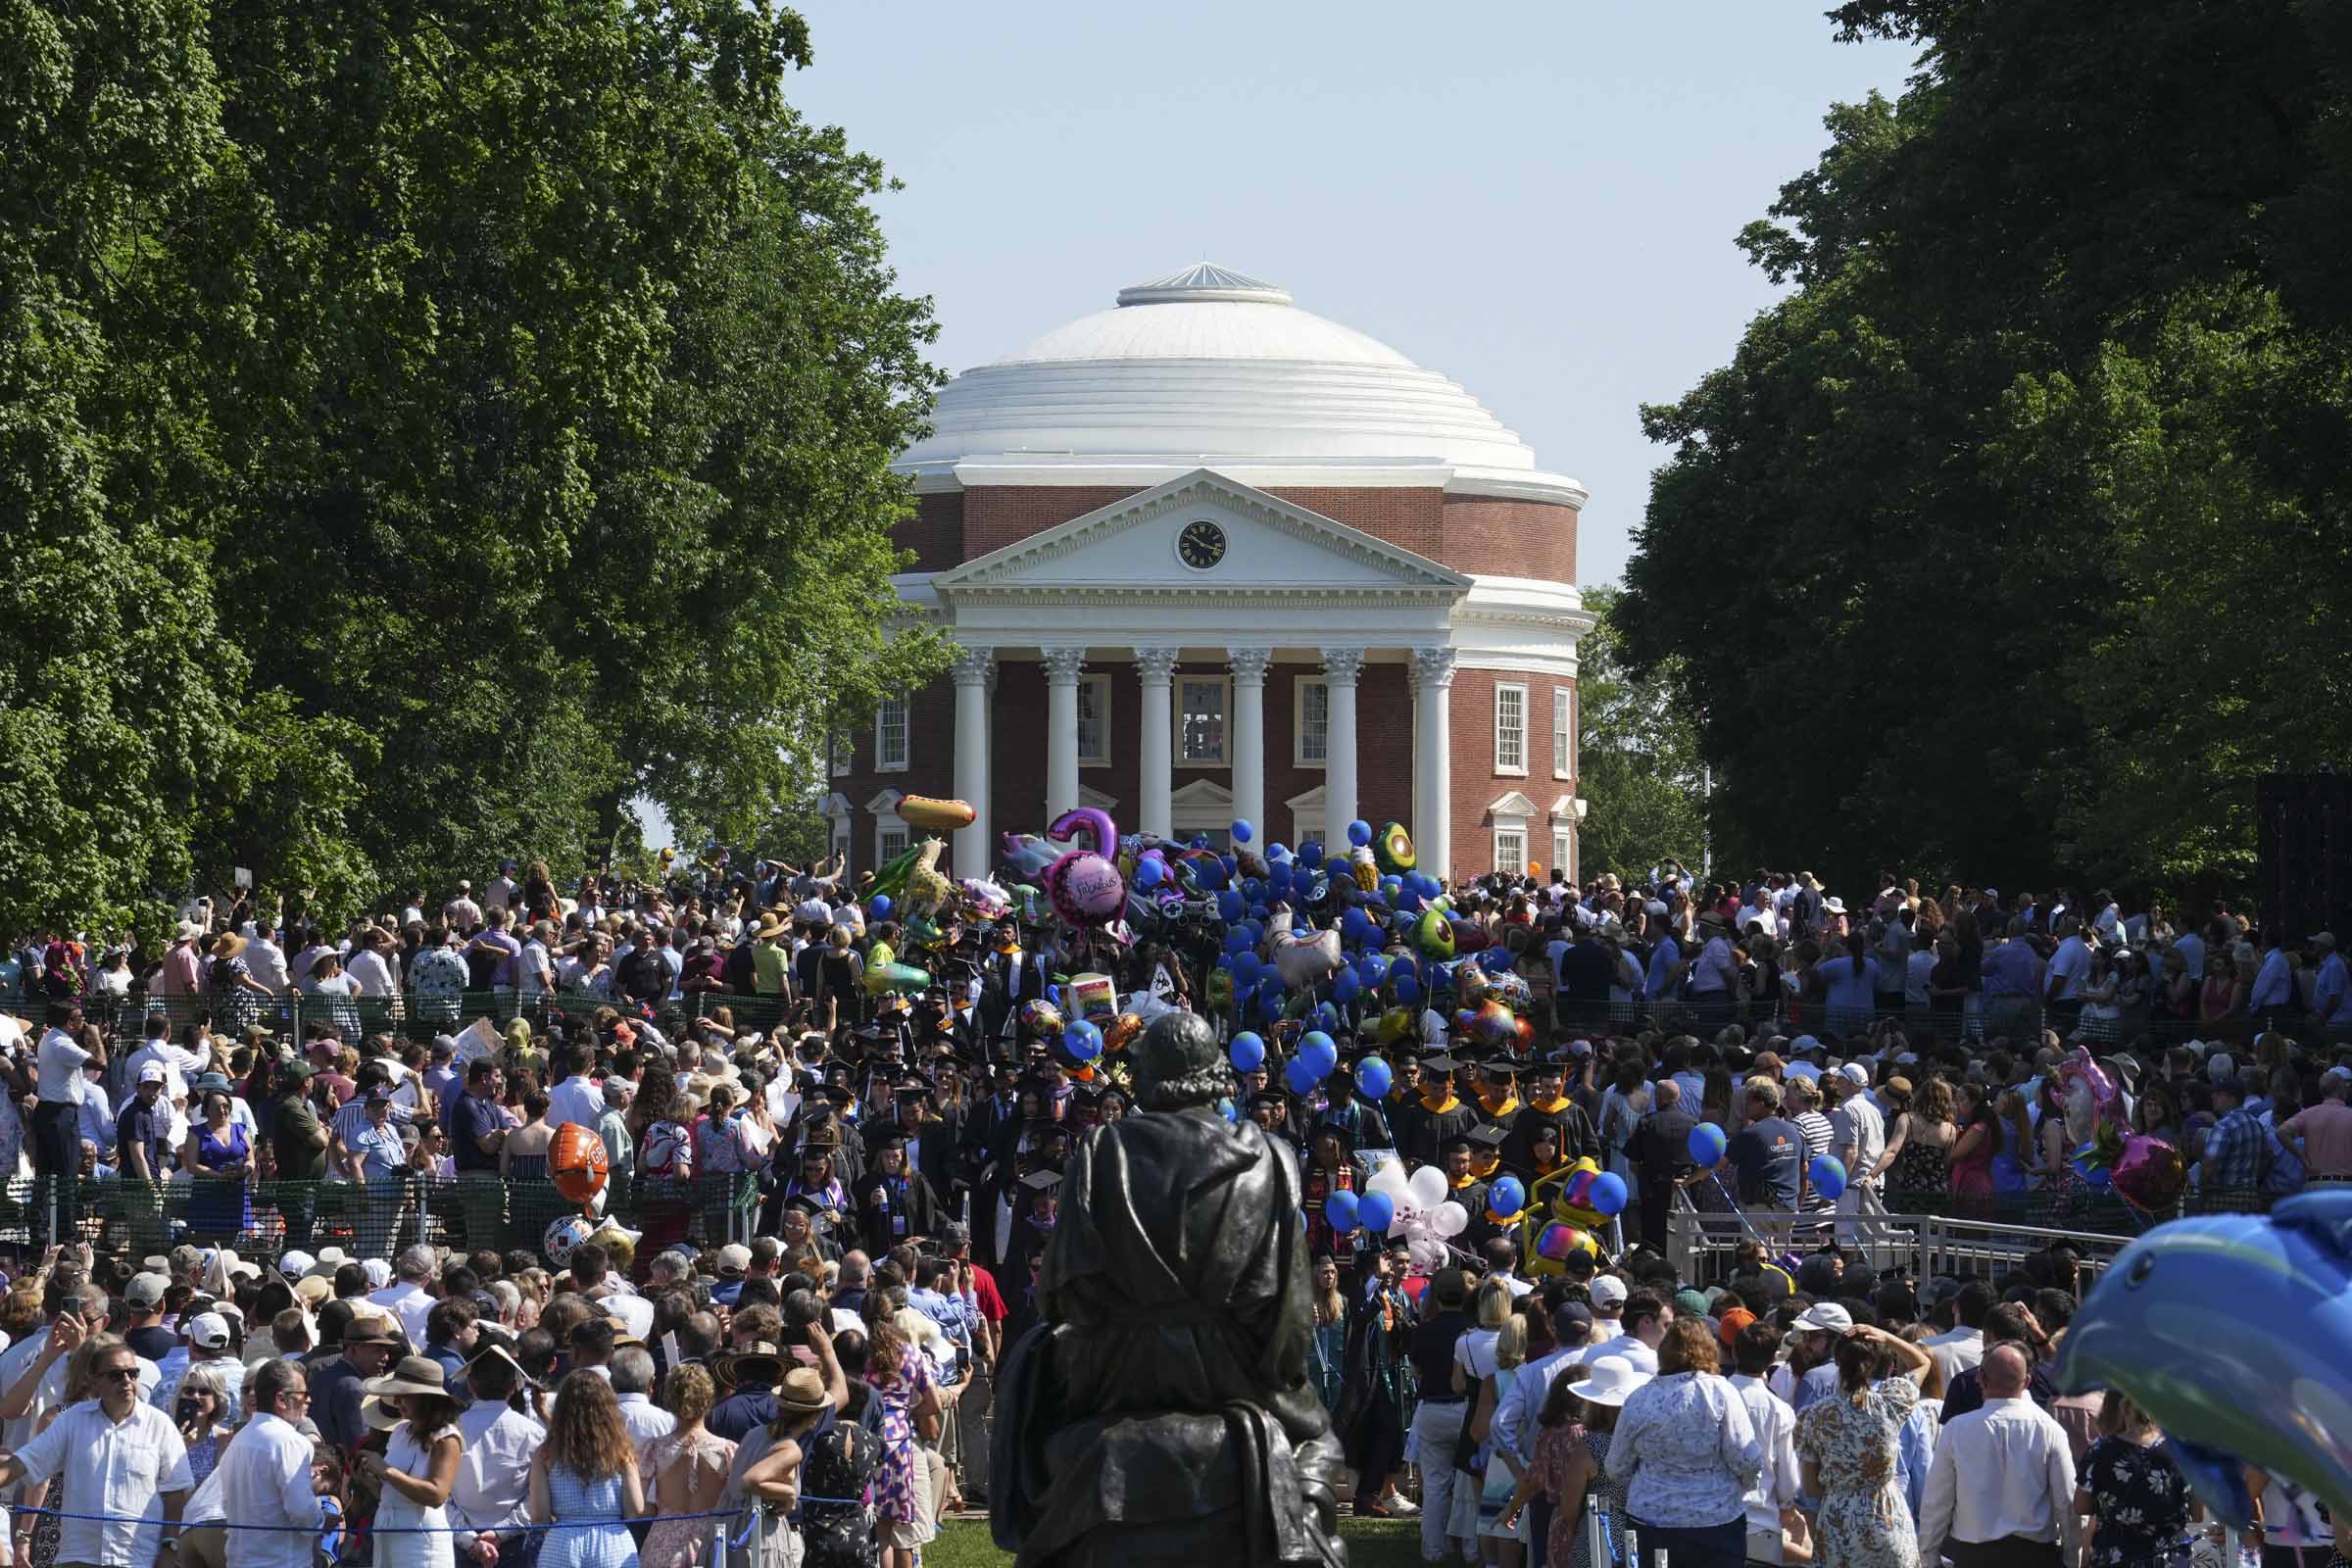 Hundreds of spectators turn to view the Rotunda as a wave of students toting blue balloons saunters down the Lawn.